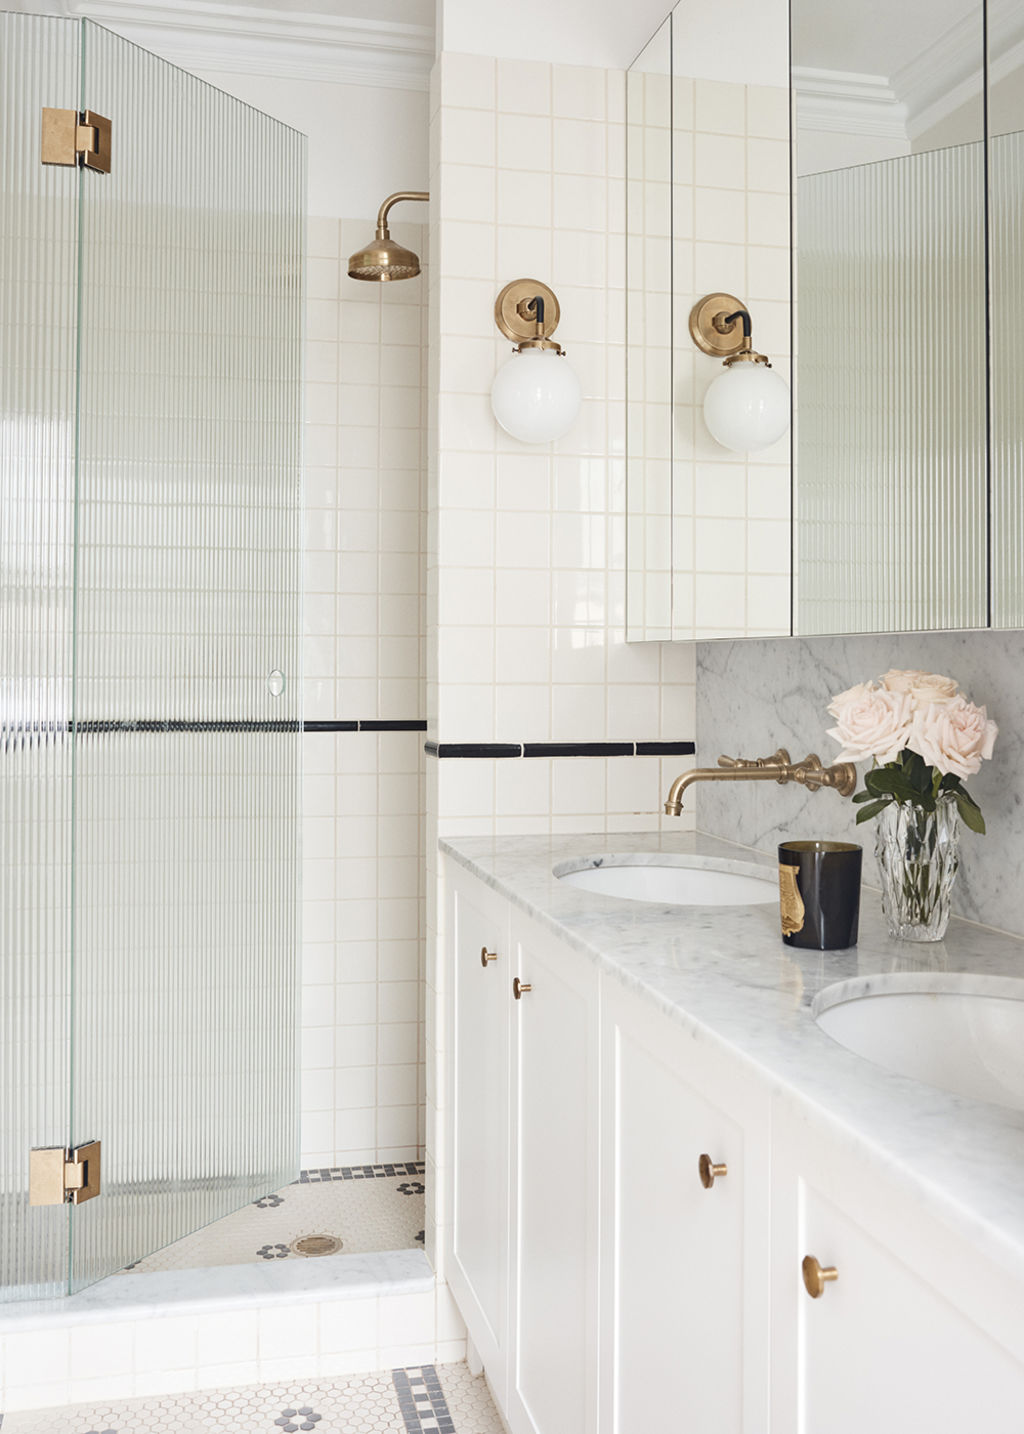 The design team created their version of a traditional New York-style  bathroom. Photo: Damian Bennett